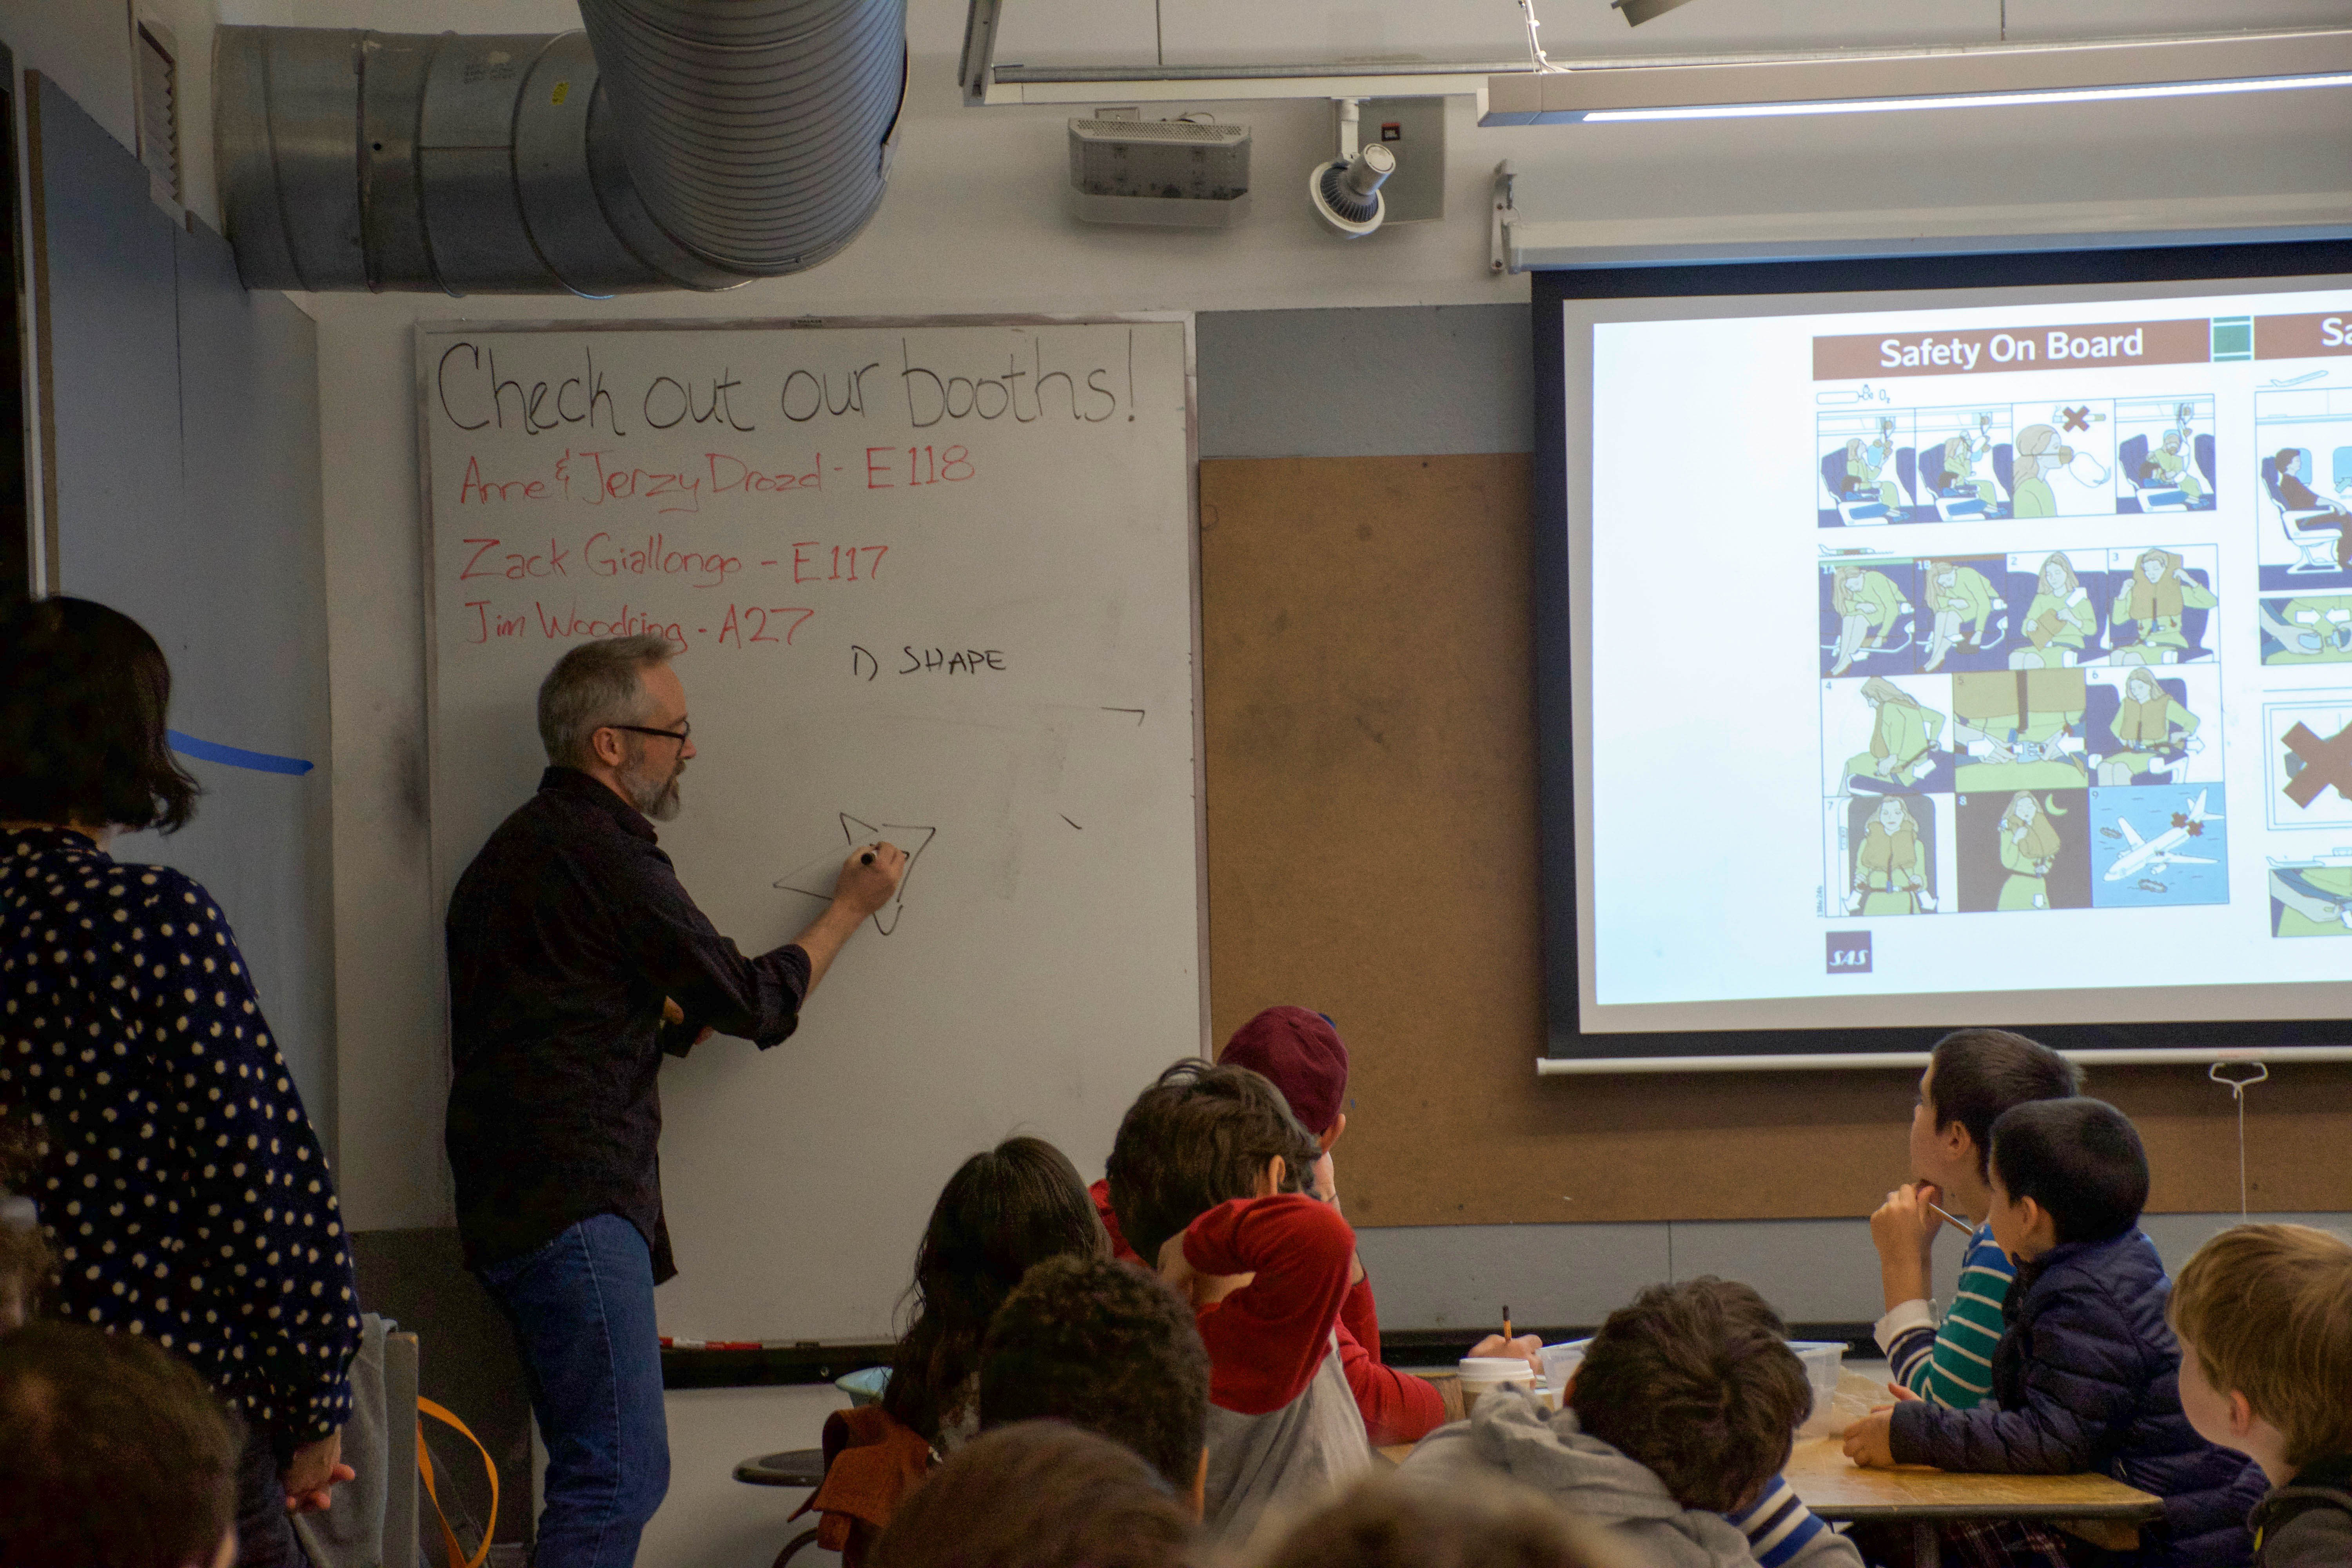 A man presenting a workshop on how to draw comics in front of a screen